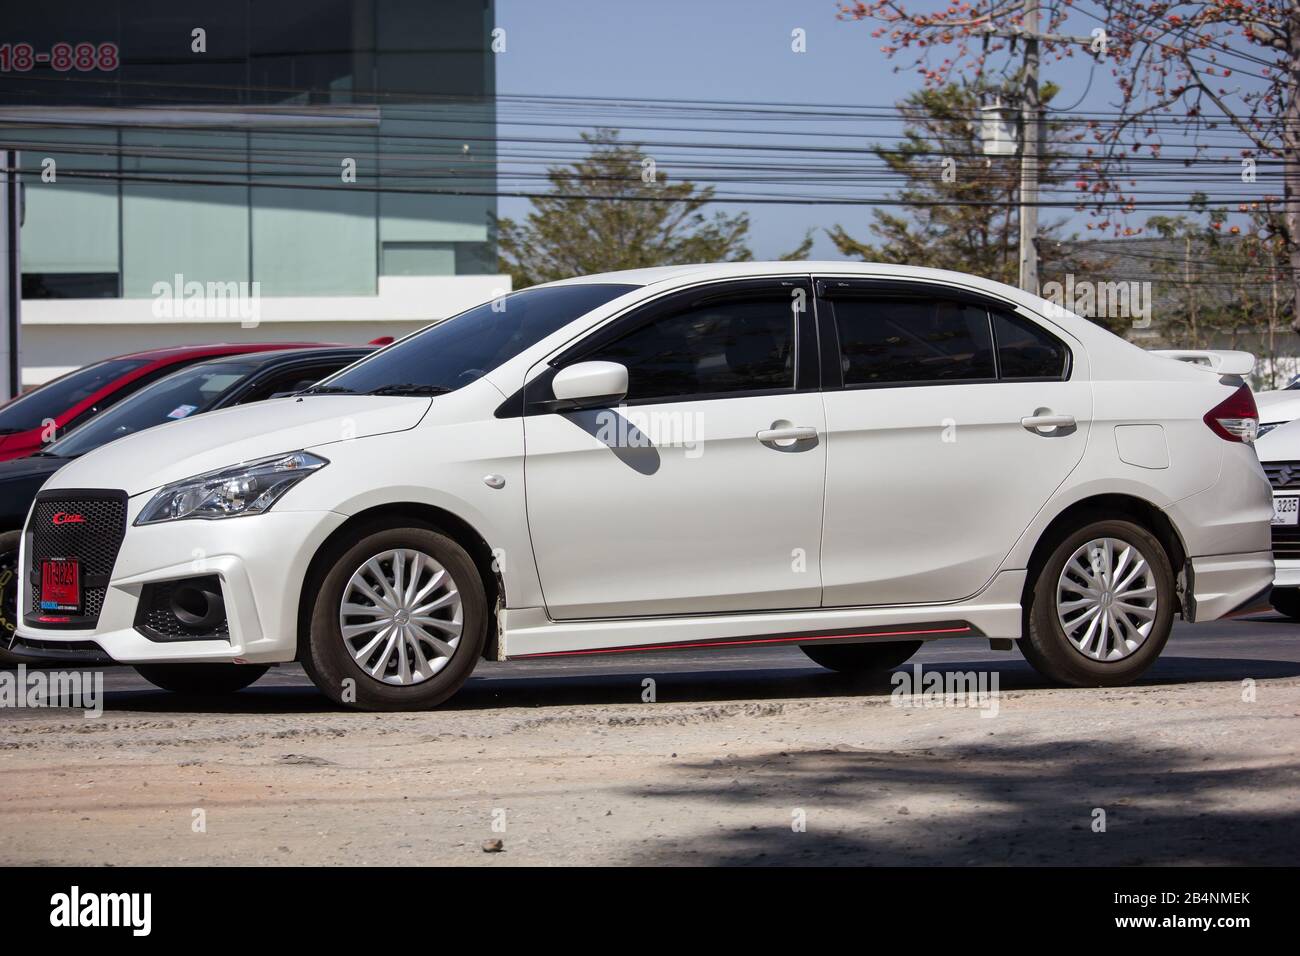 Suzuki Ciaz High Resolution Stock Photography And Images Alamy